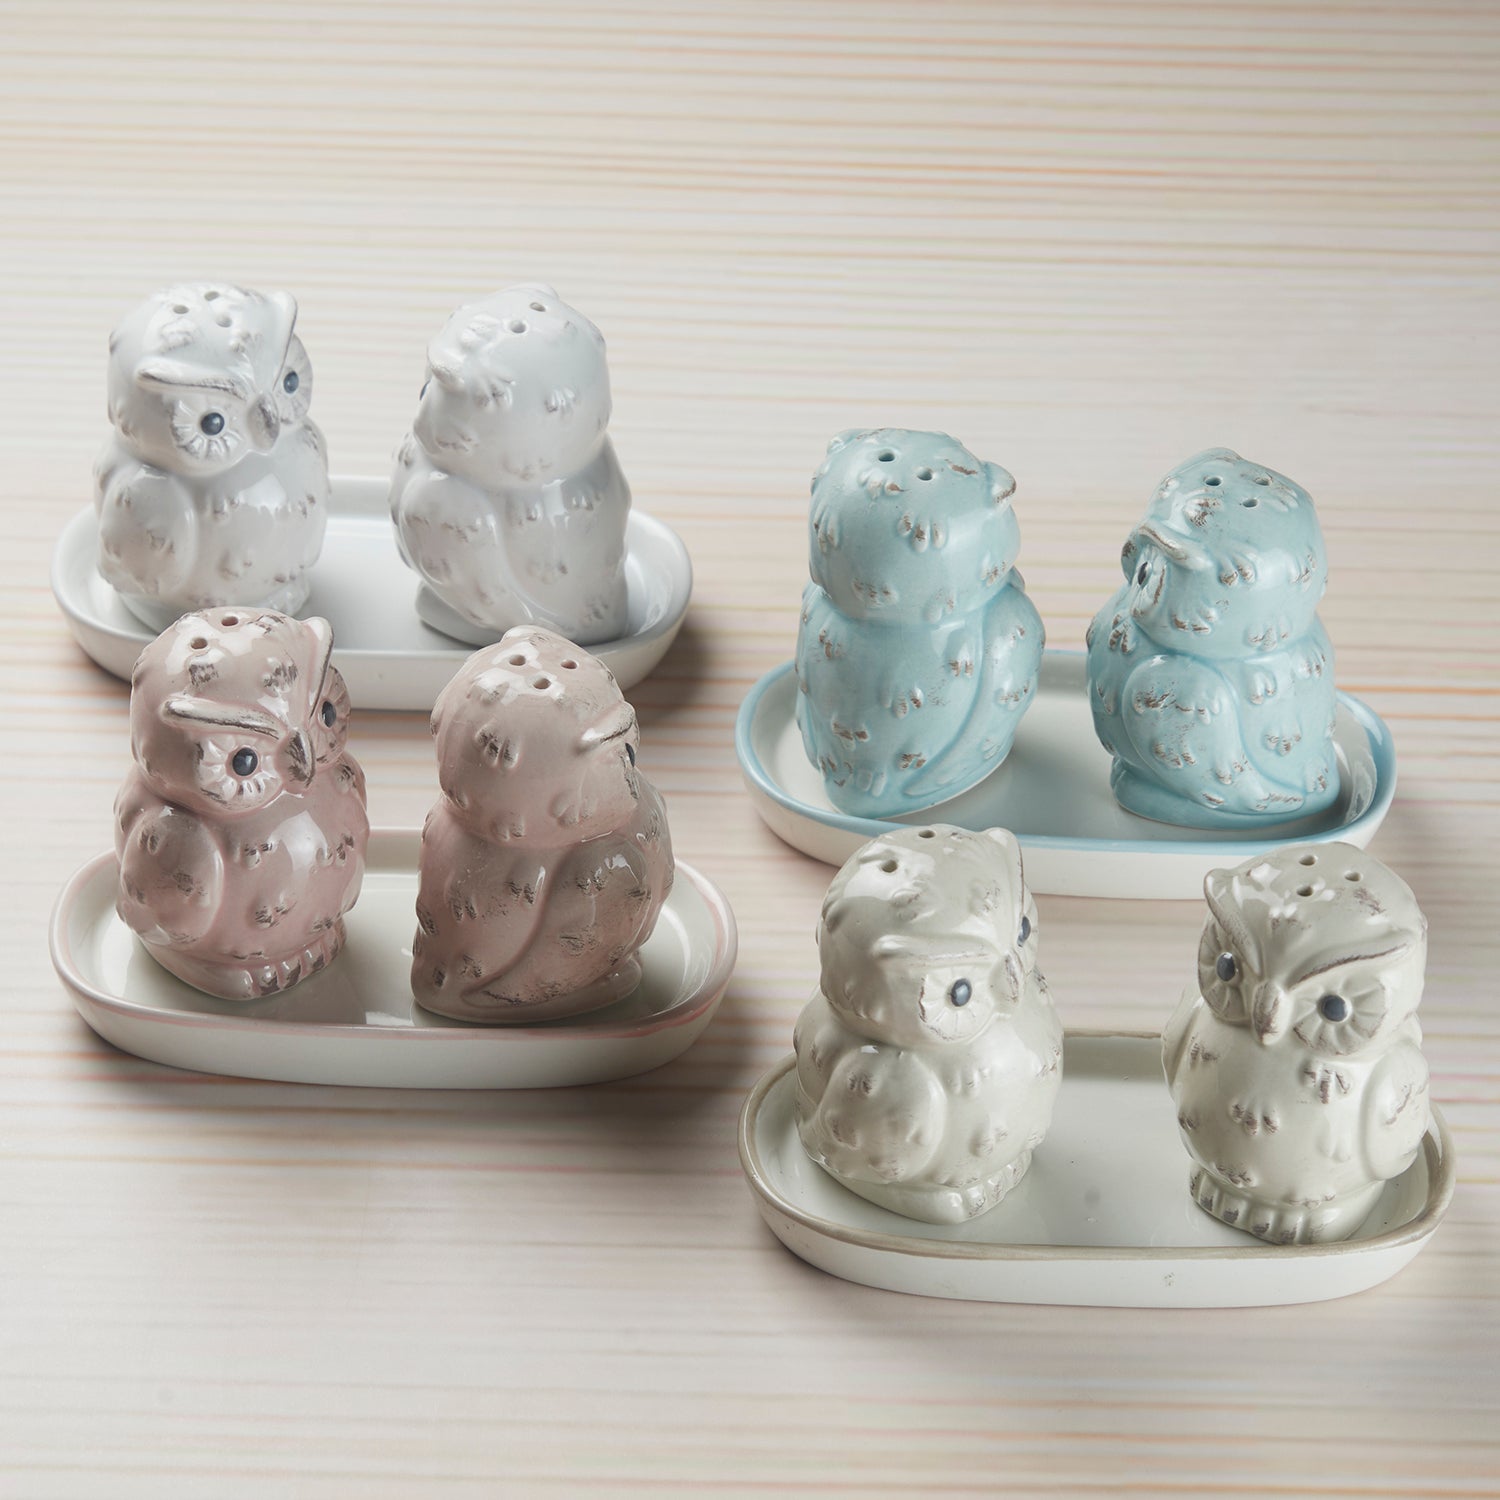 Ceramic Salt and Pepper Set with tray, Owl Design, Pink